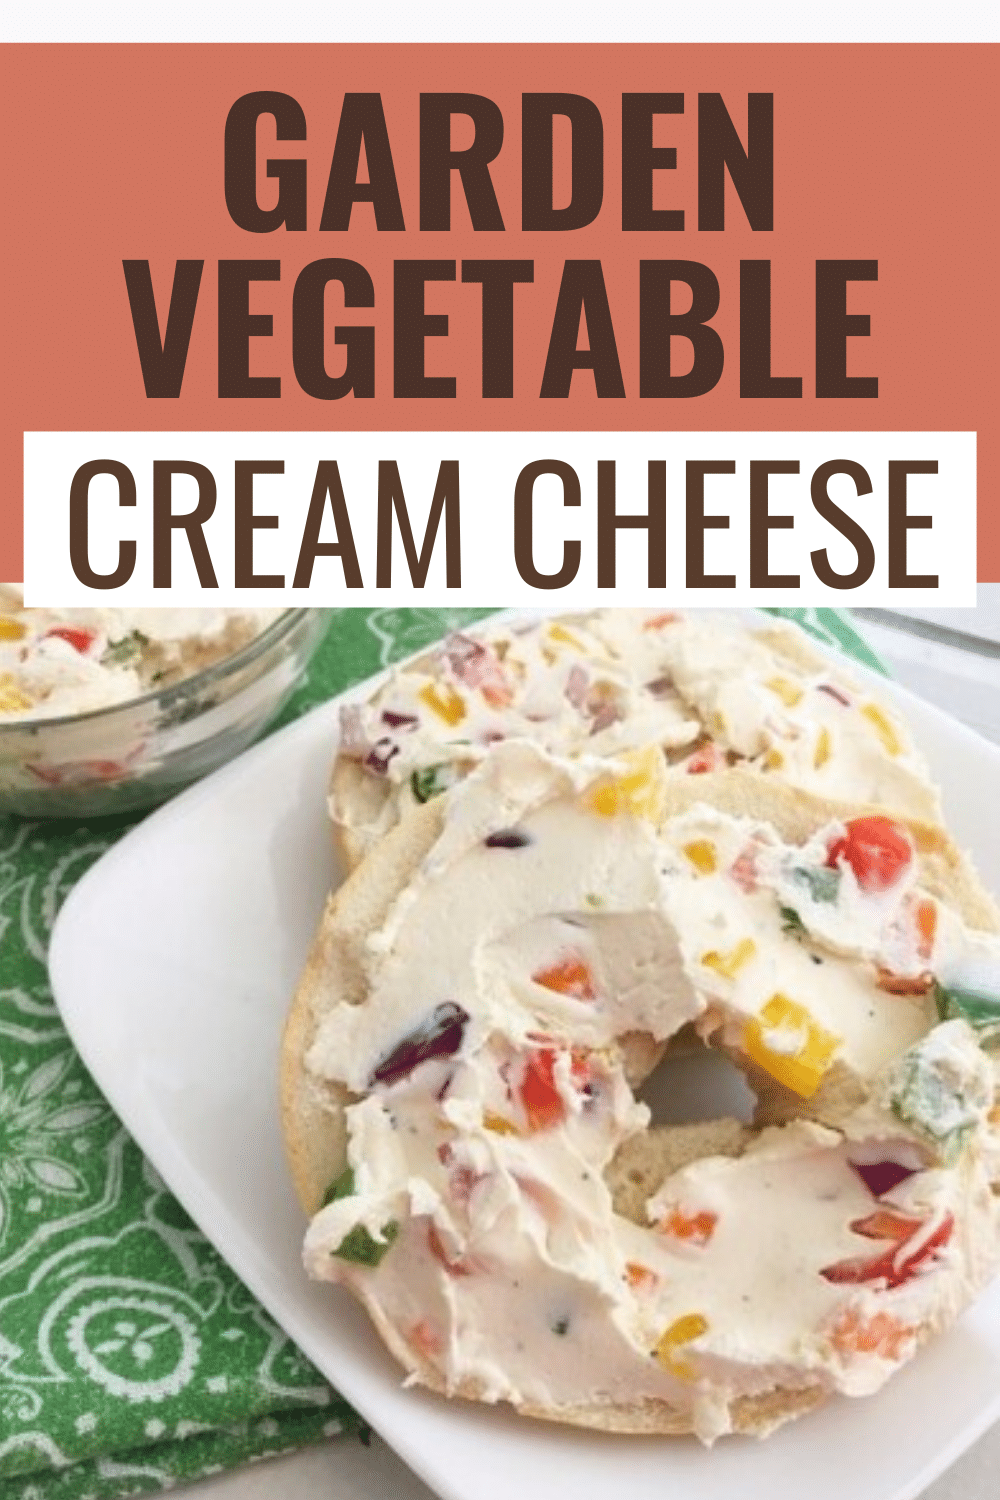 I love how colorful this garden vegetable cream cheese is. And I REALLY love how easy it is to make! #bagels #breakfast #creamcheese via @wondermomwannab